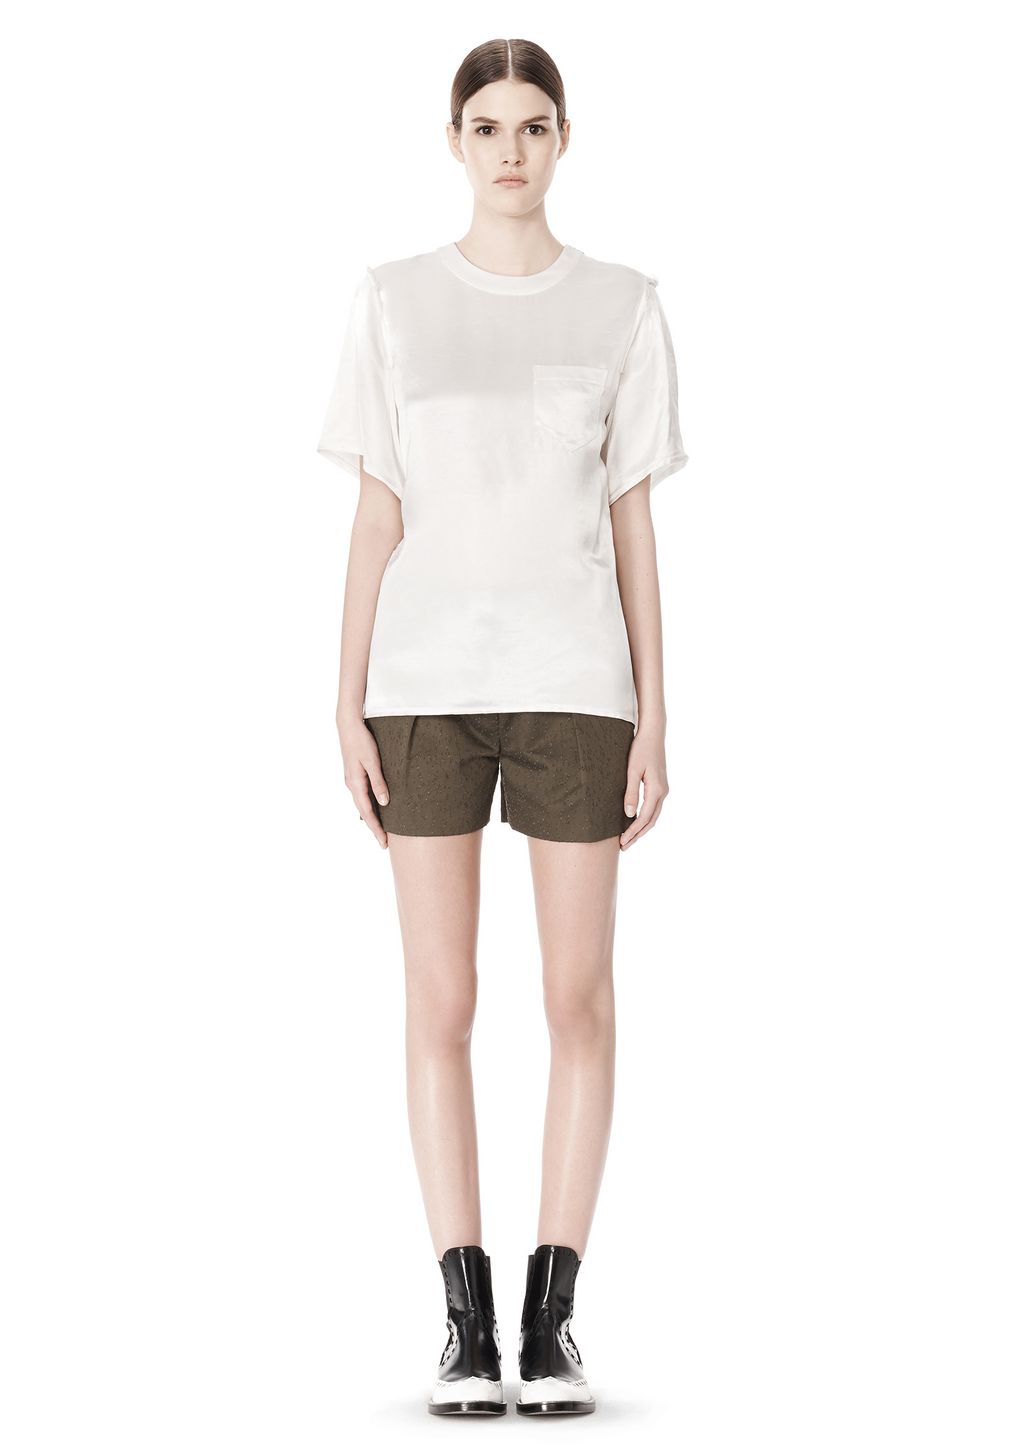 Alexander Wang ‎T SHIRT WITH EXPOSED DISTRESSED BACK ‎ ‎TOP‎ | Official ...